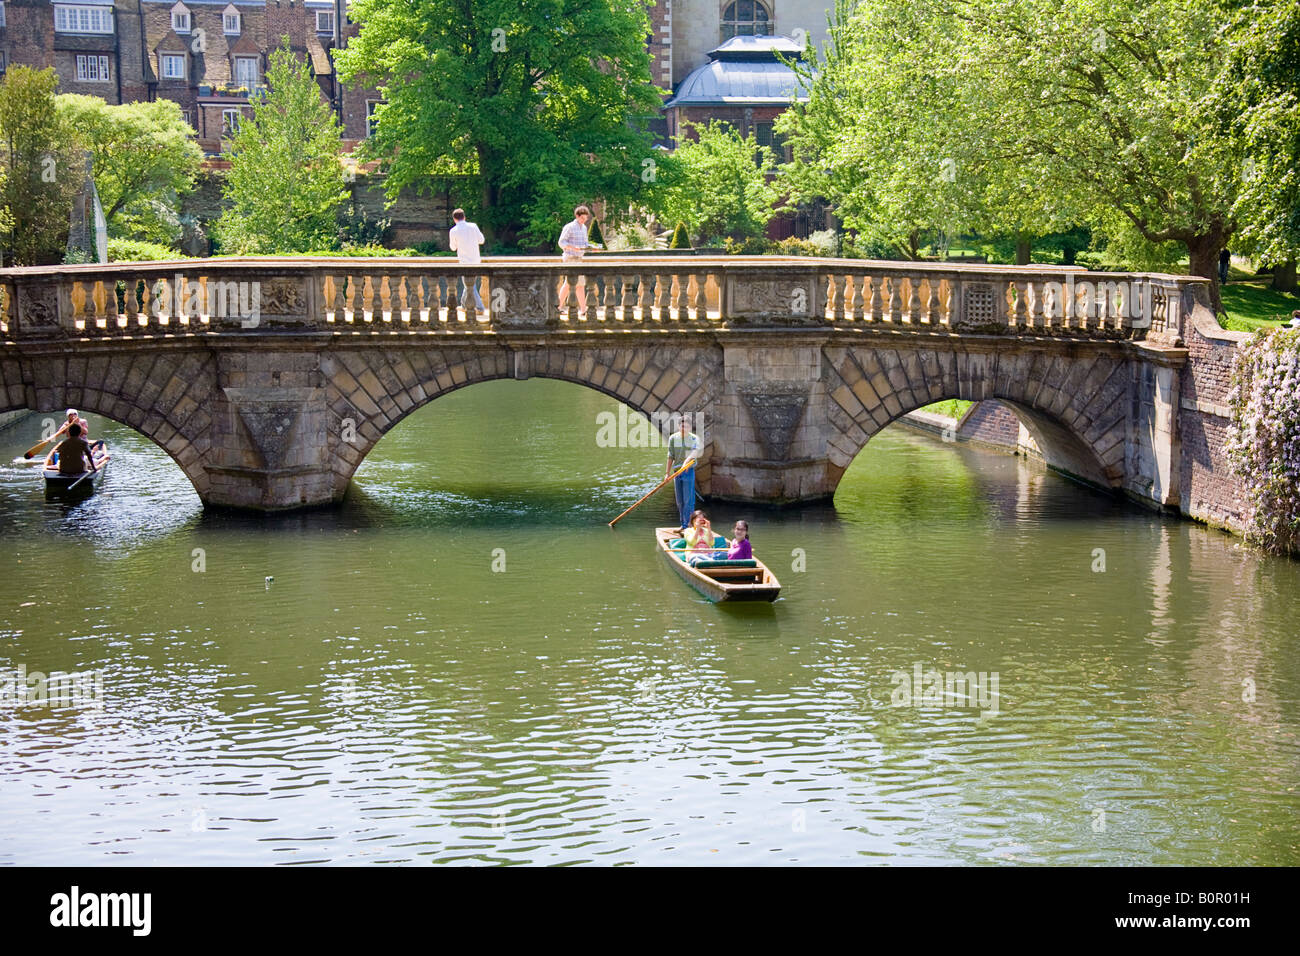 The 18th century old St John's College Bridge over the river Cam. Stock Photo